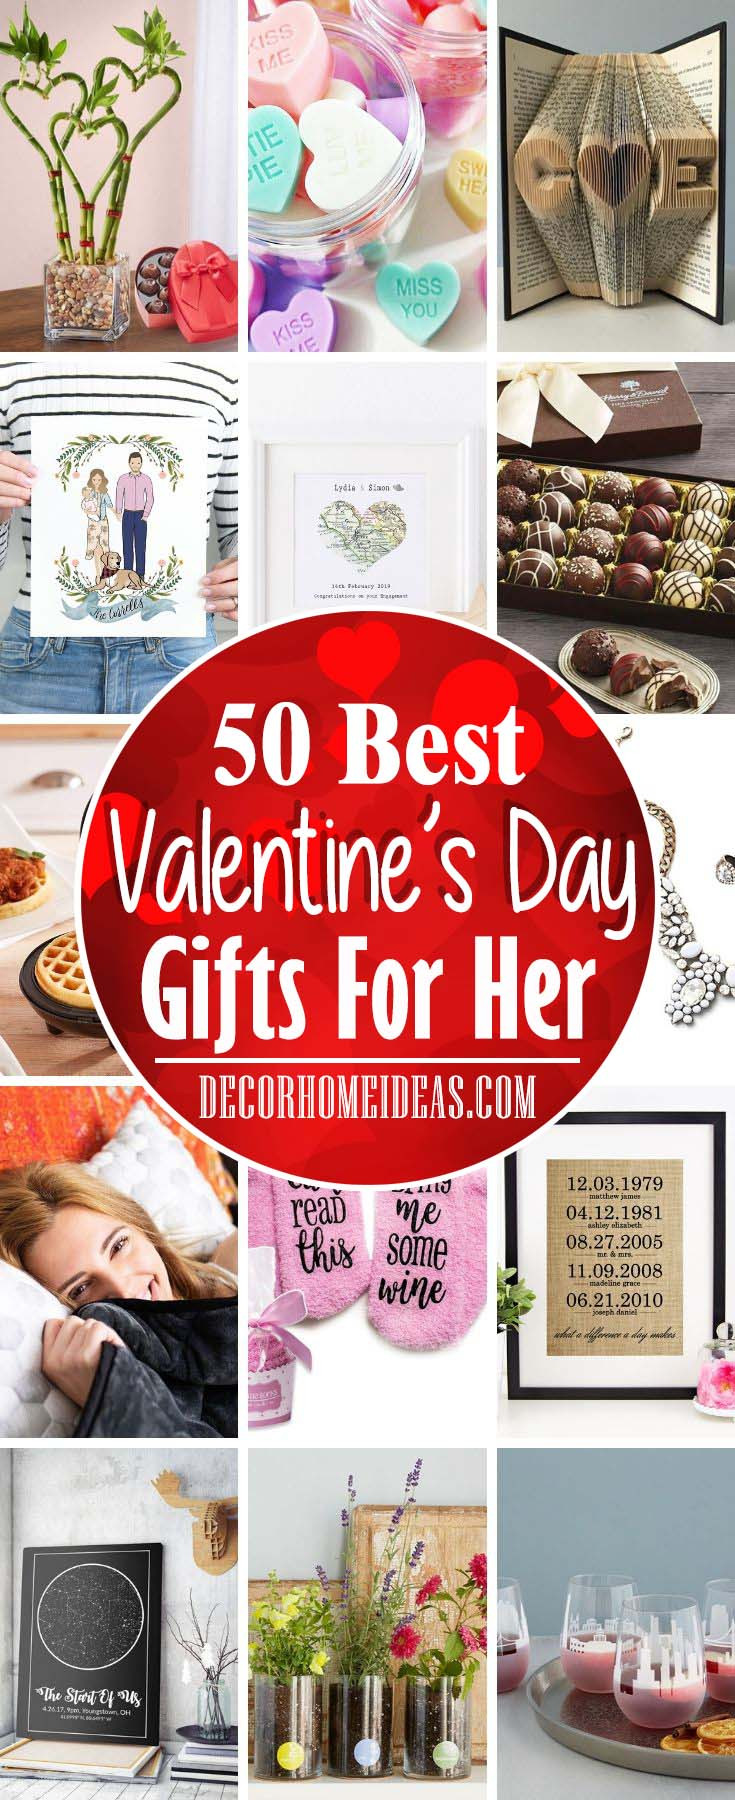 Romantic Valentines Day Gift Ideas For Her
 50 Best Valentine s Day Gifts For Her 2020 Update